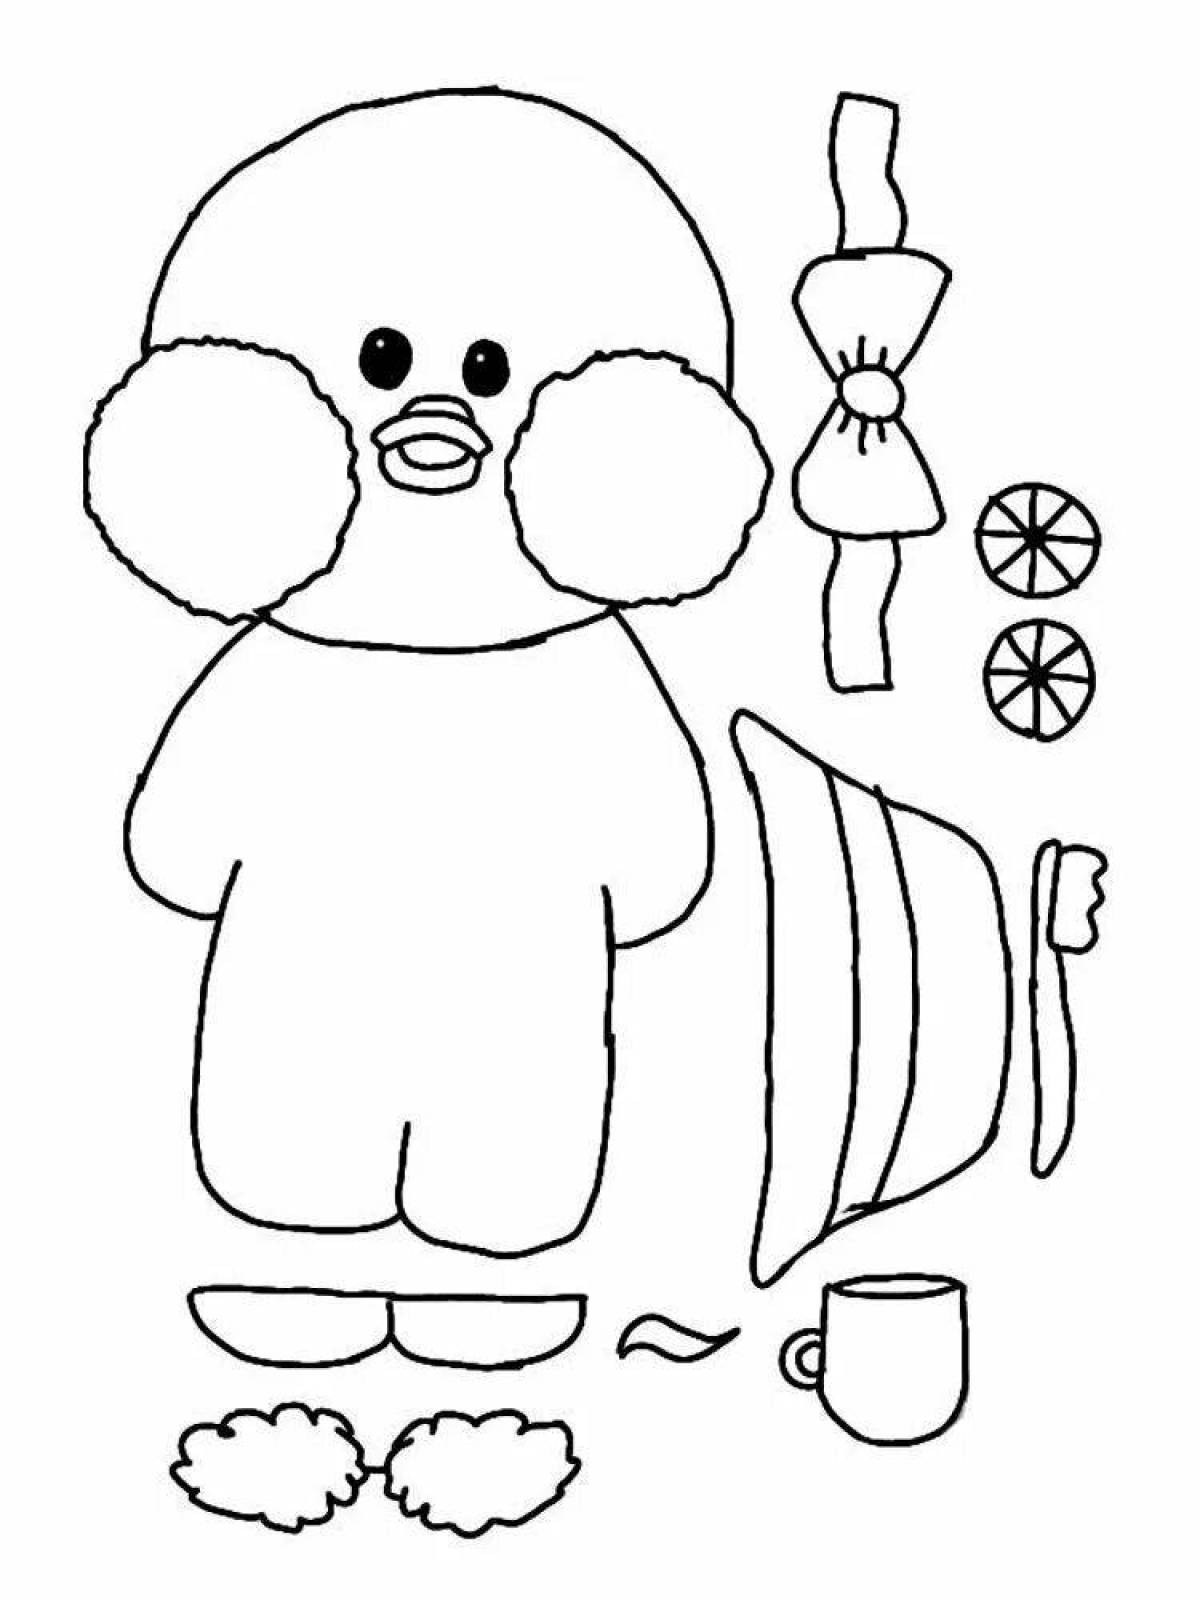 Bright lola fanfan duck coloring page